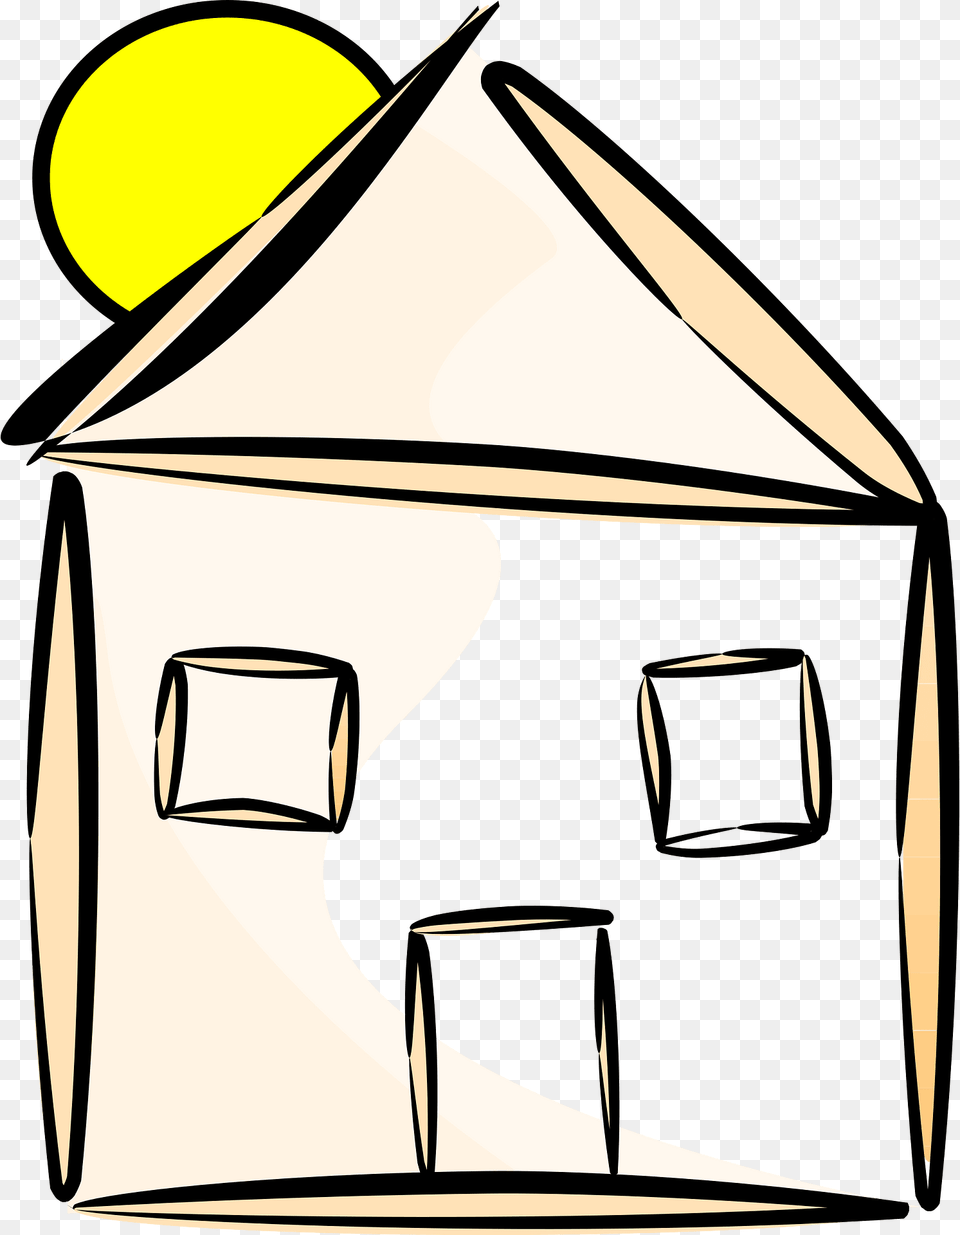 House Clipart, Shelter, Architecture, Building, Outdoors Png